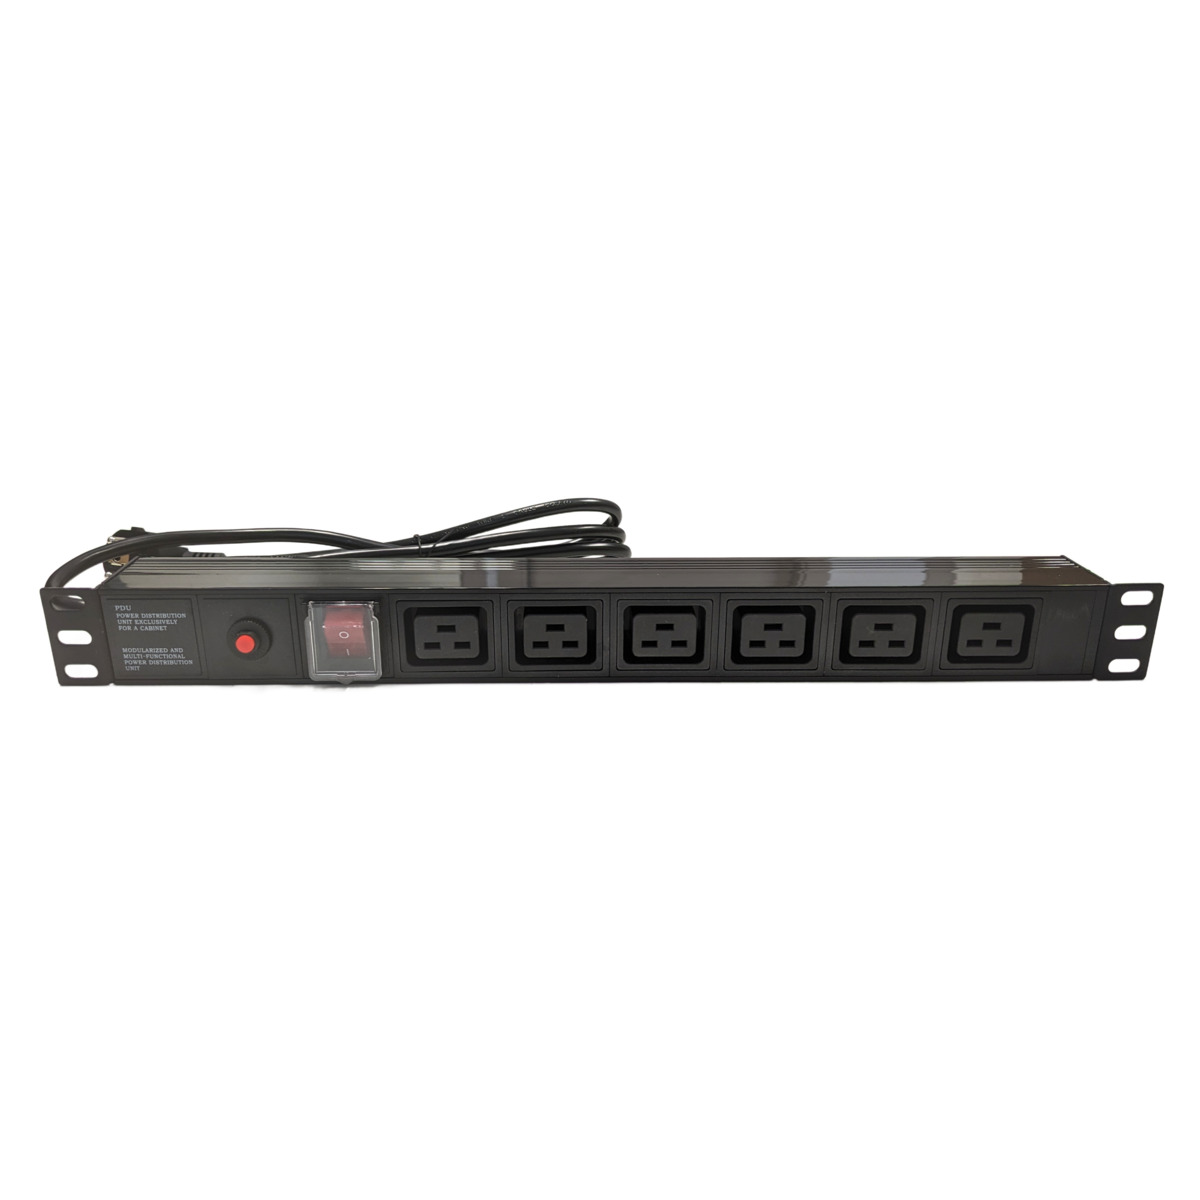 PDU / Rack Power Strip 19" 1U 6 x IEC C19 with Switch and Surge Protection